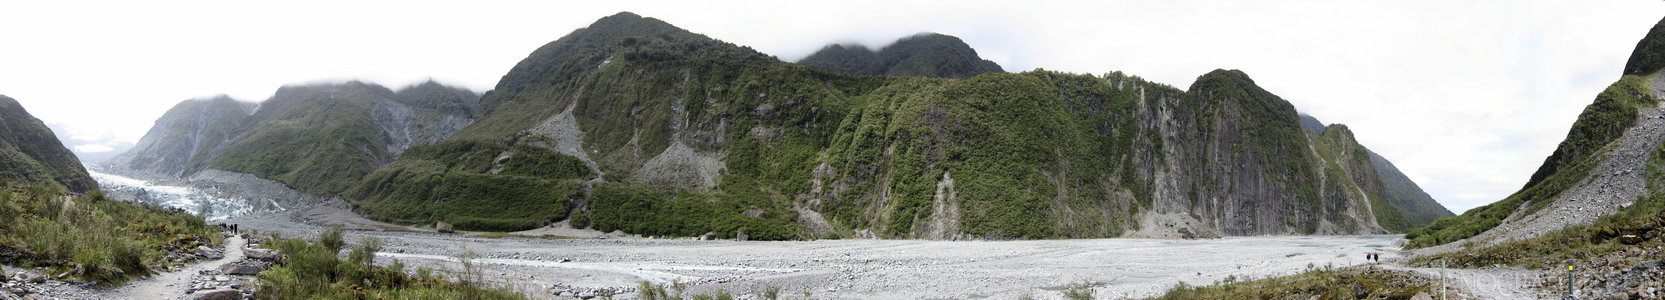 Fox Glacier Carve - The terminus of Fox Glacier at the end of the rock path it has left behind during receede